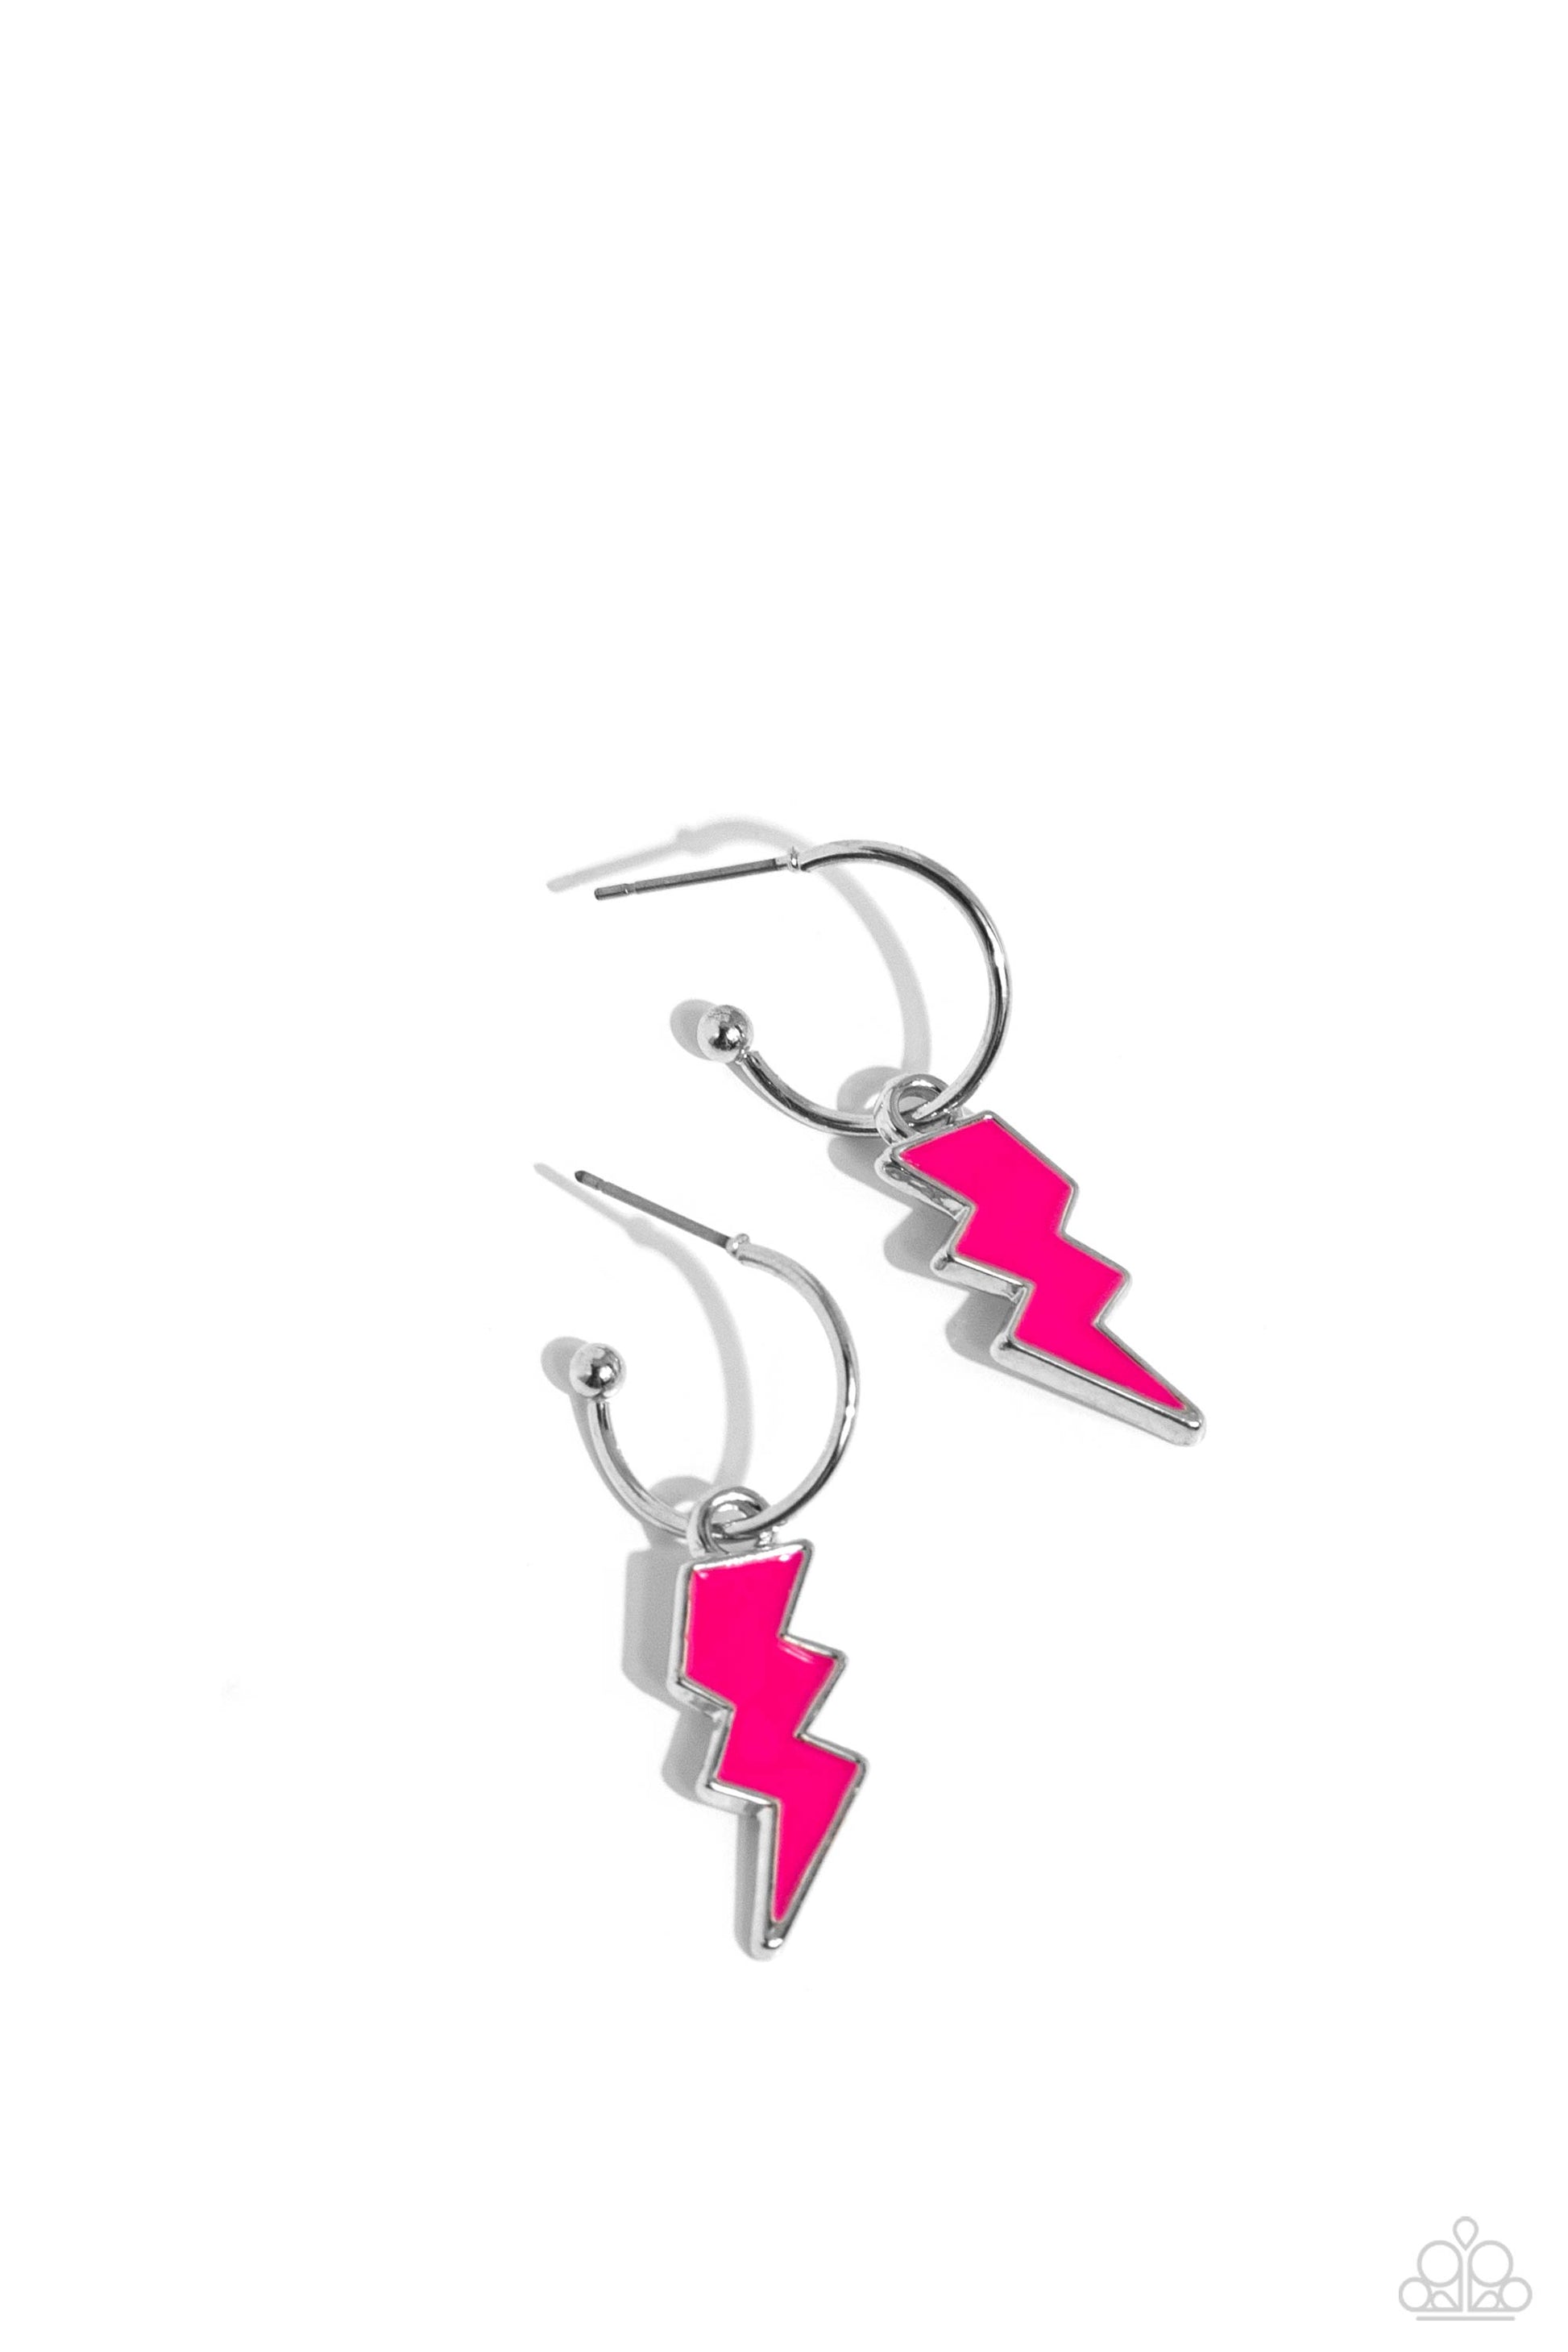 Lightning Limit Pink Hoop Earring - Paparazzi Accessories  A small, skinny, silver hoop curves around the ear, where a silver ball is affixed to create the look of a barbell. A Rose Violet lightning charm slides along the hoop, showcasing a colorfully electric statement. Earring attaches to a standard post fitting. Hoop measures approximately 1/2" in diameter.  Sold as one pair of hoop earrings.  P5HO-PKXX-068XX